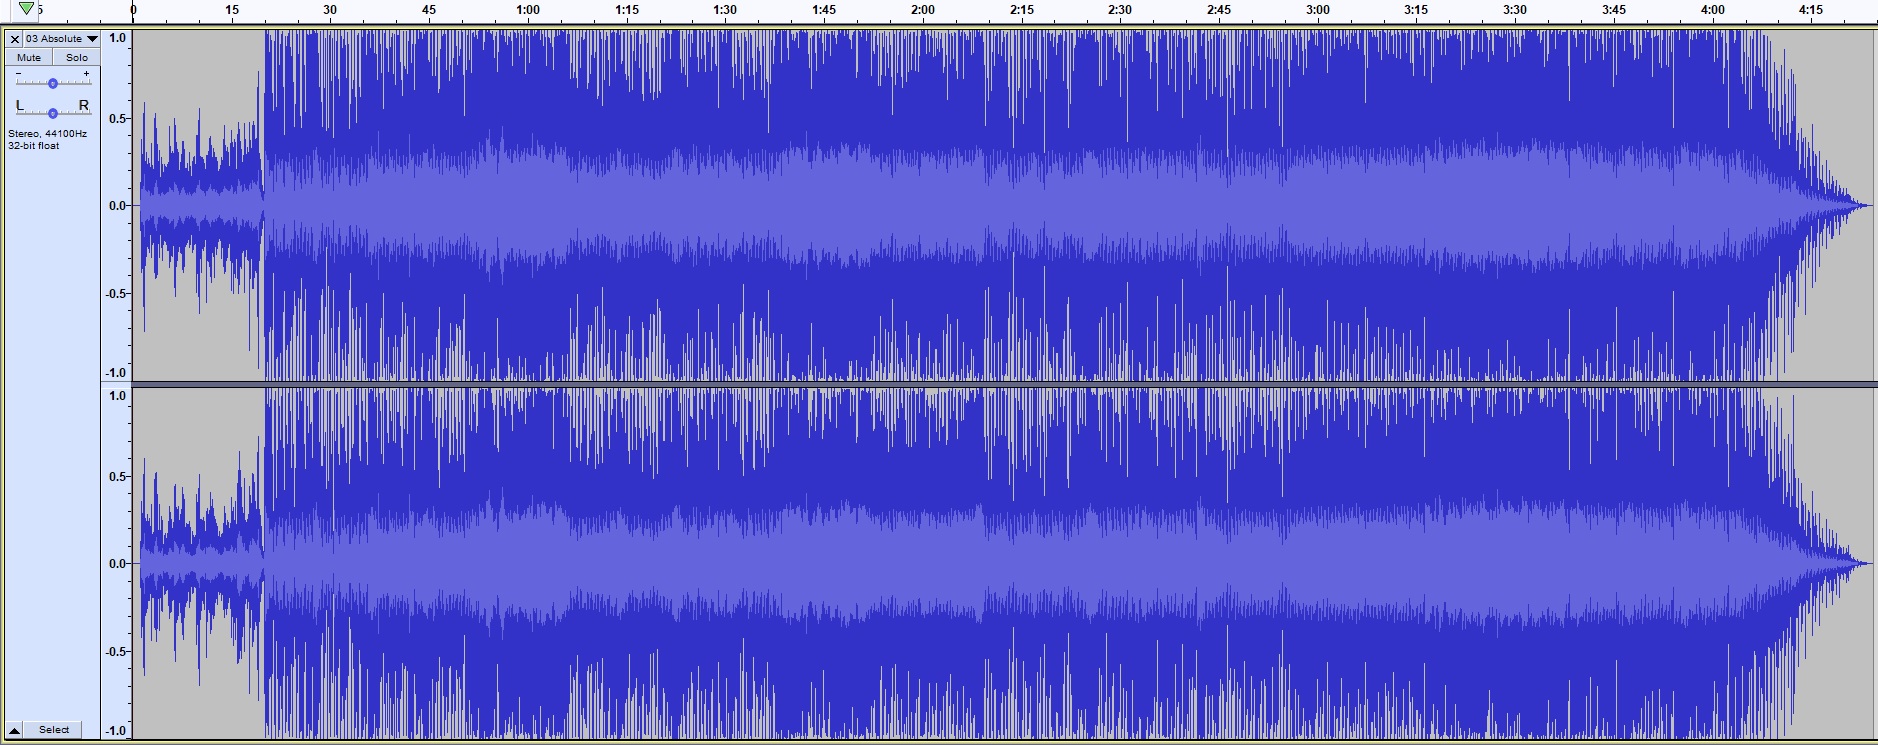 WAV file display in Audacity for 'Absolute' from 2022 Japanese CD edition